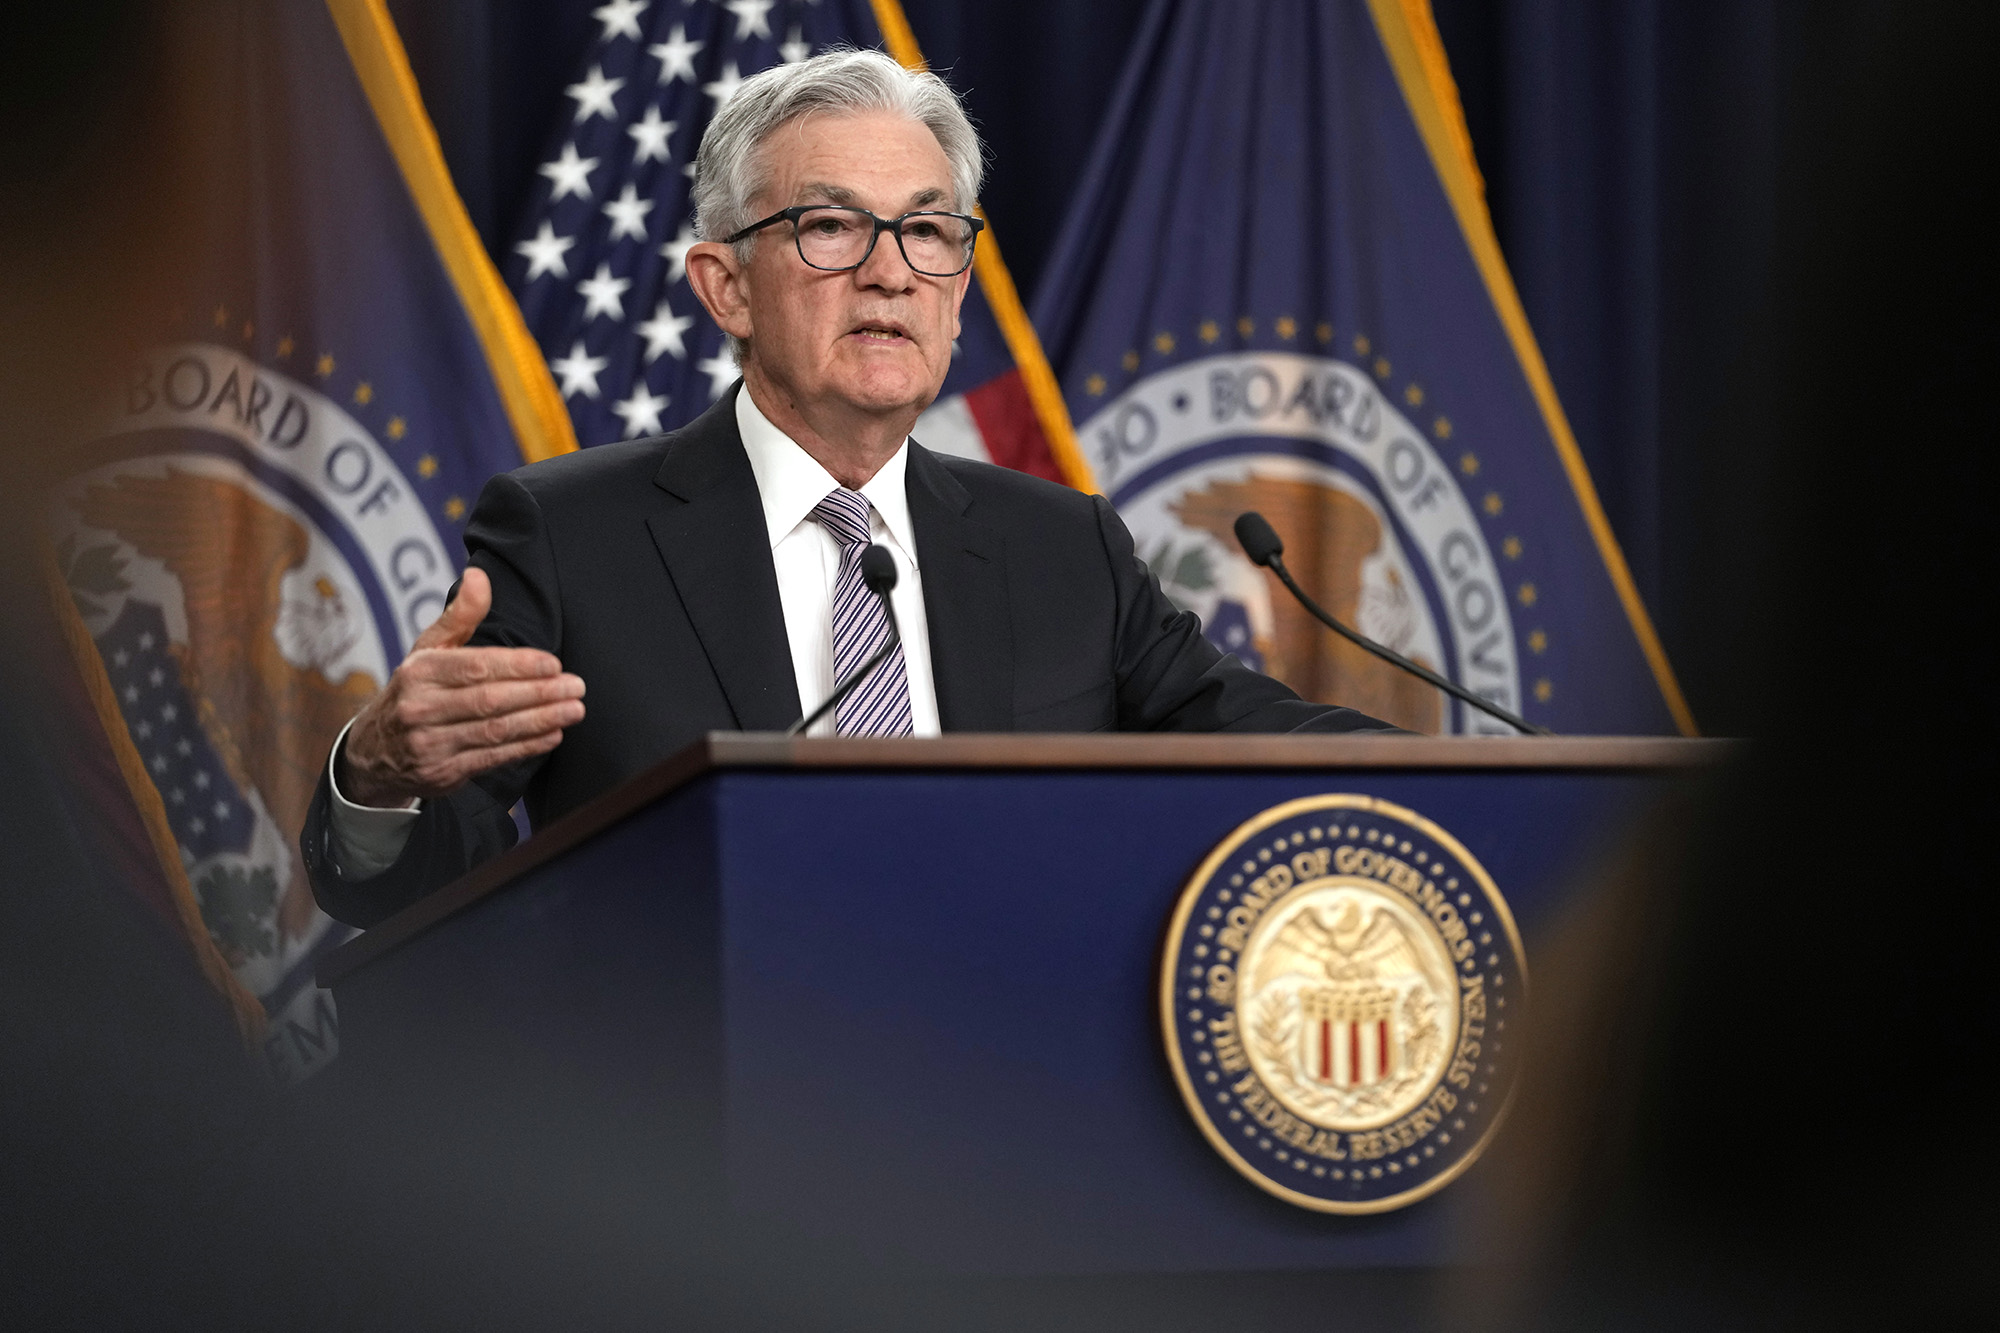 Federal Reserve Chairman Jerome Powell speaks during a news conference in Washington, on May 3, following the Federal Open Market Committee meeting.